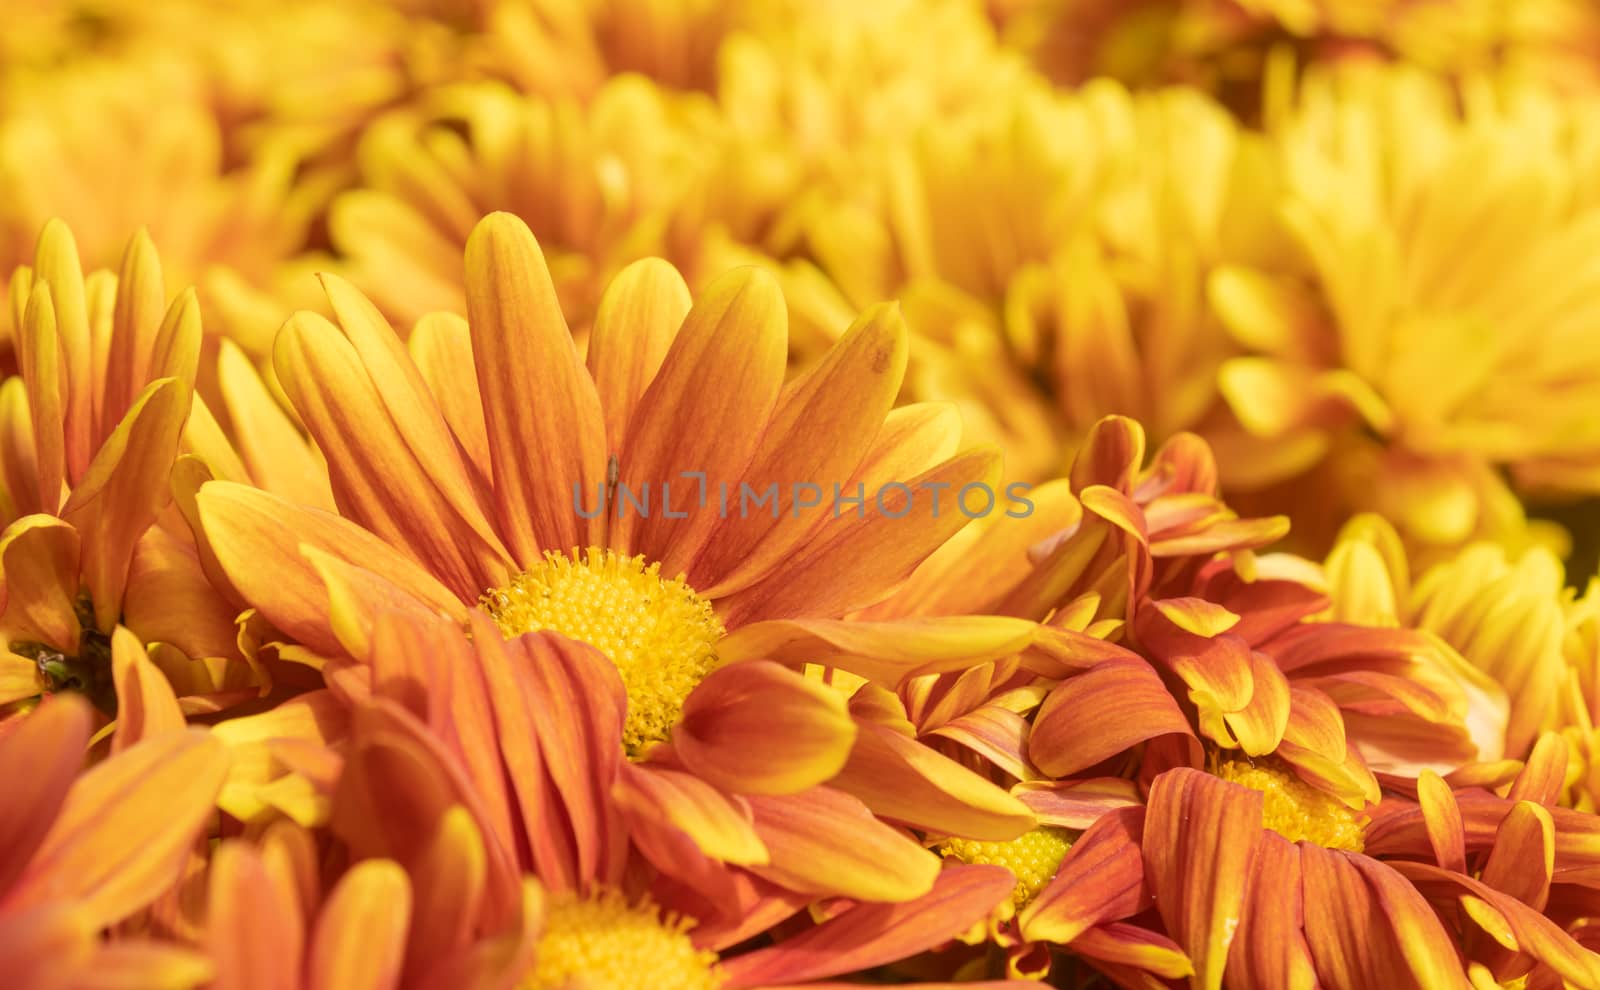 Orange Gerbera Daisy or Gerbera Flower in Garden with Natural Light in Low Angle View